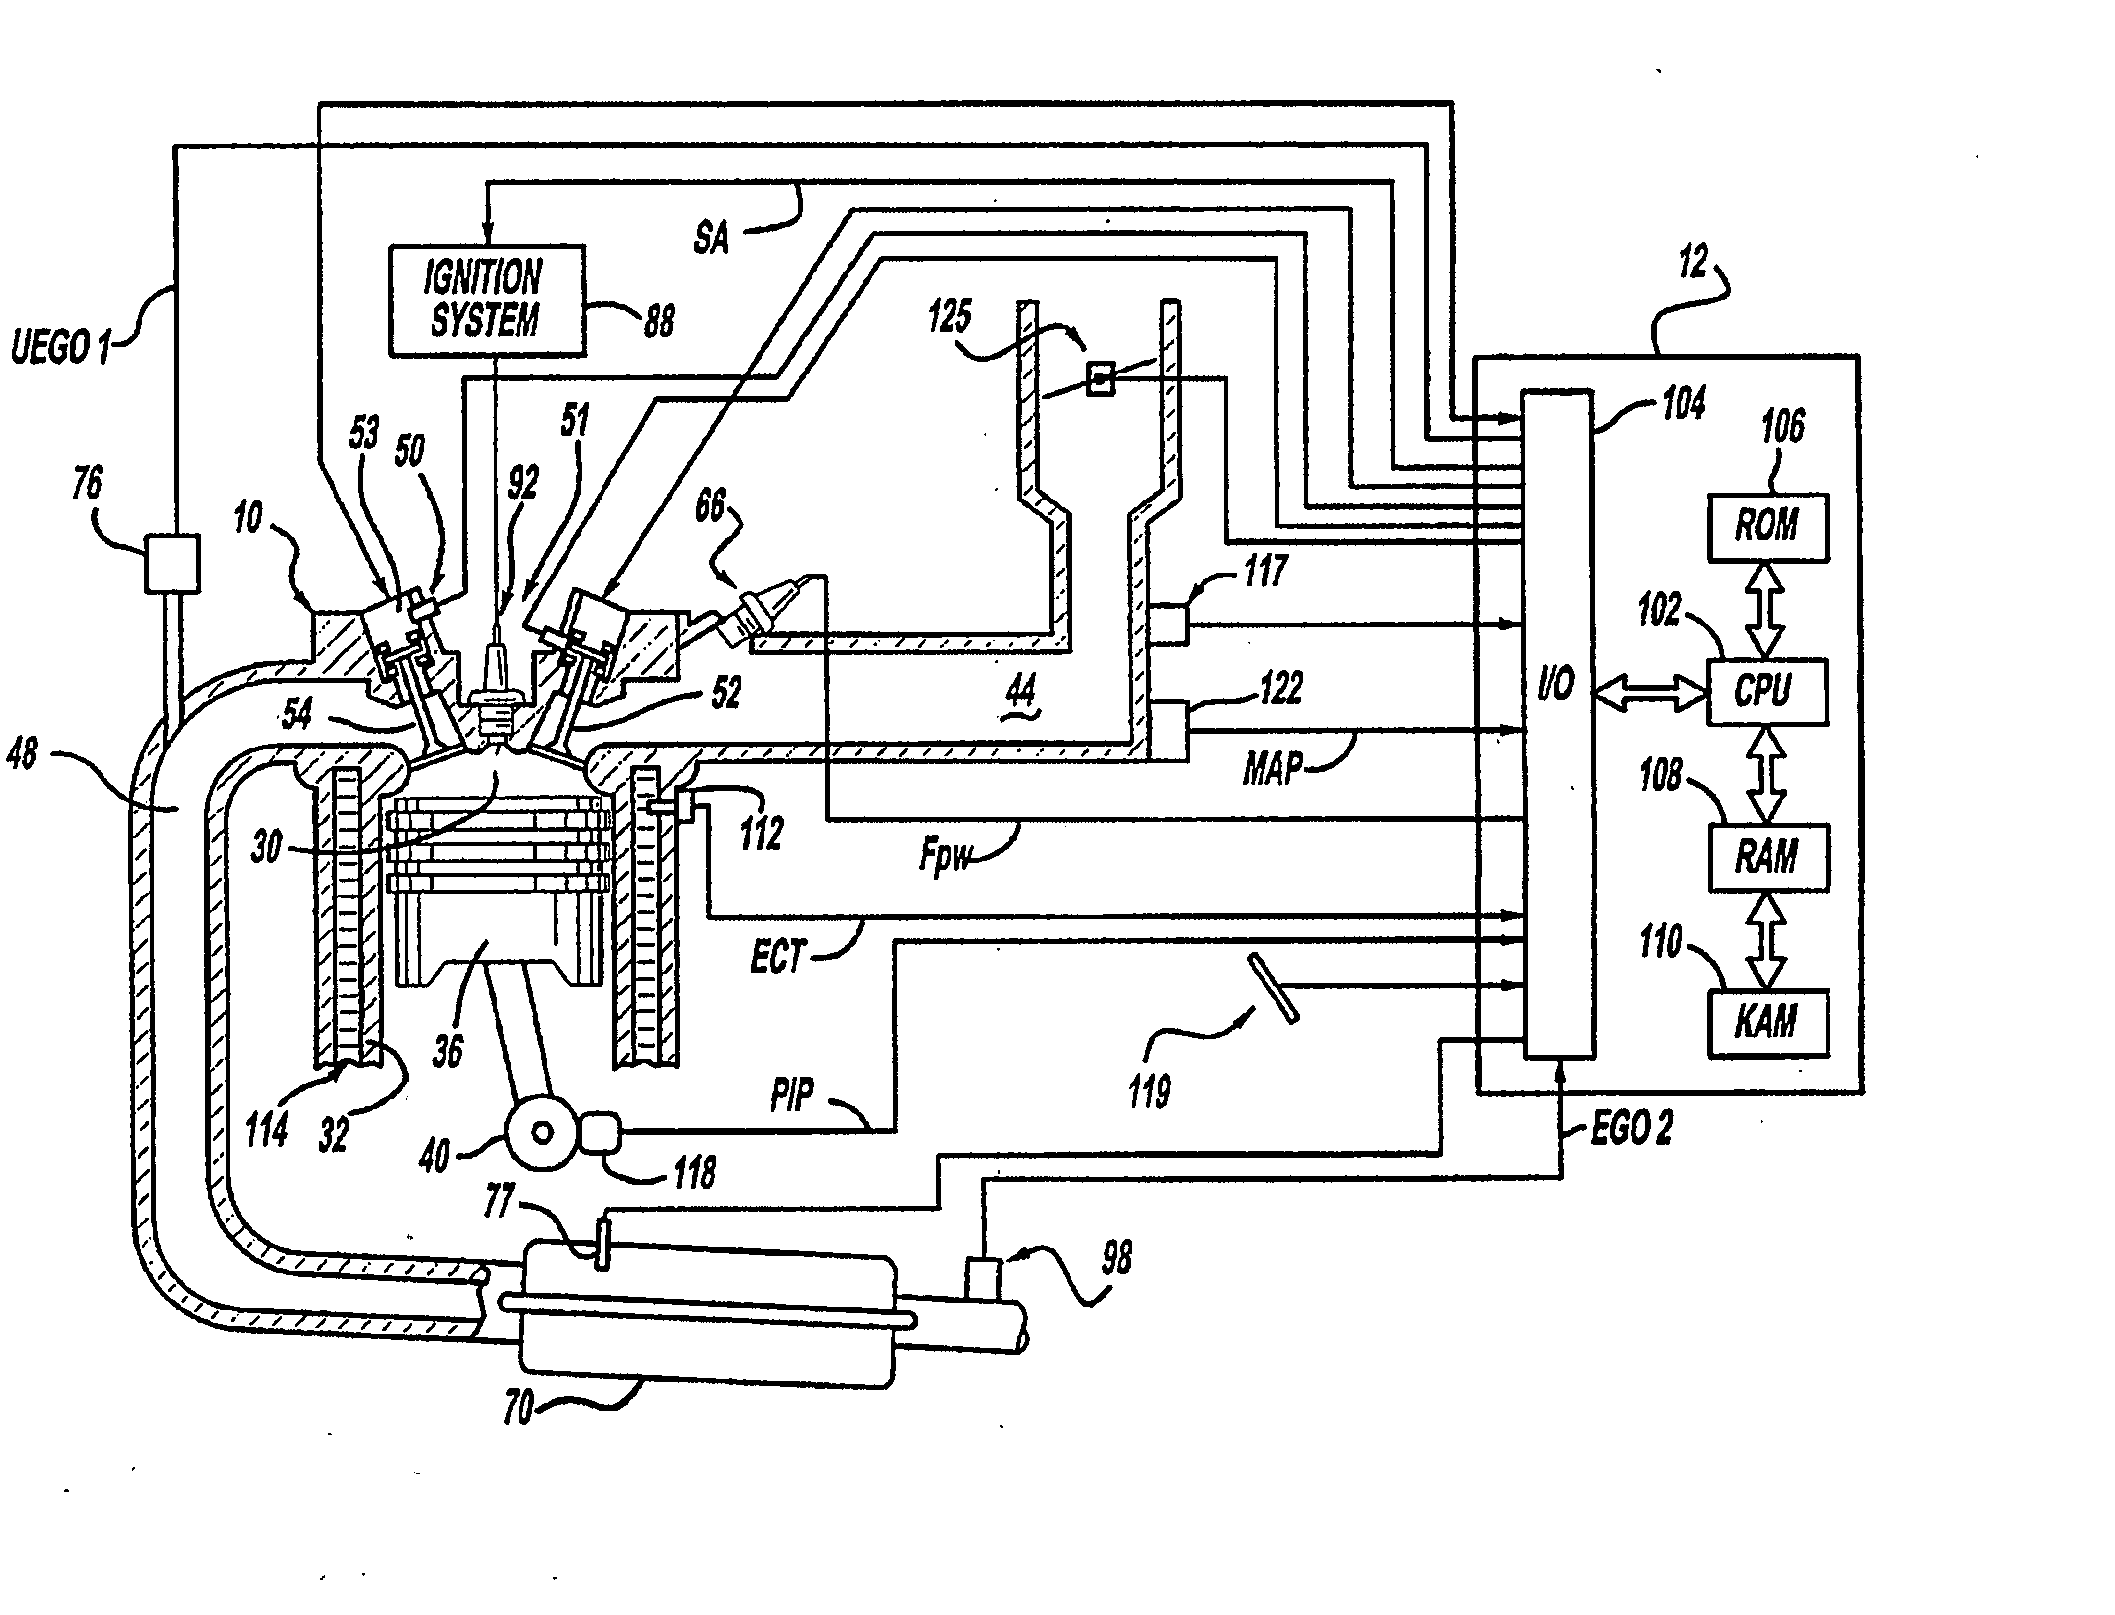 System and method for exhaust heat generation using electrically actuated cylinder valves and variable stroke combustion cycles